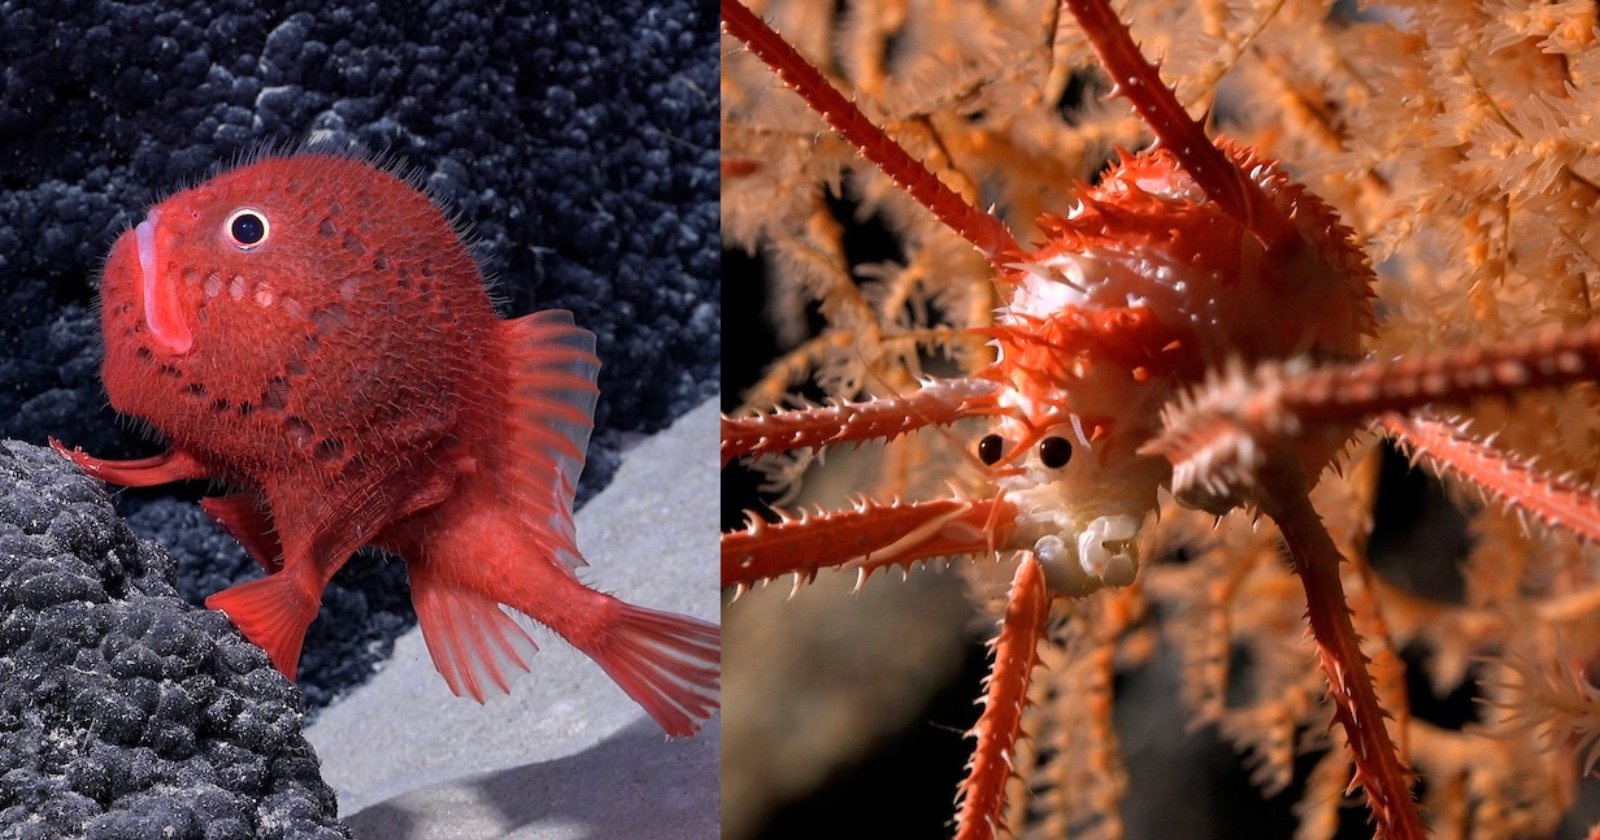 Scientists Photograph Hundreds of Never-Before-Seen Deep Sea Species